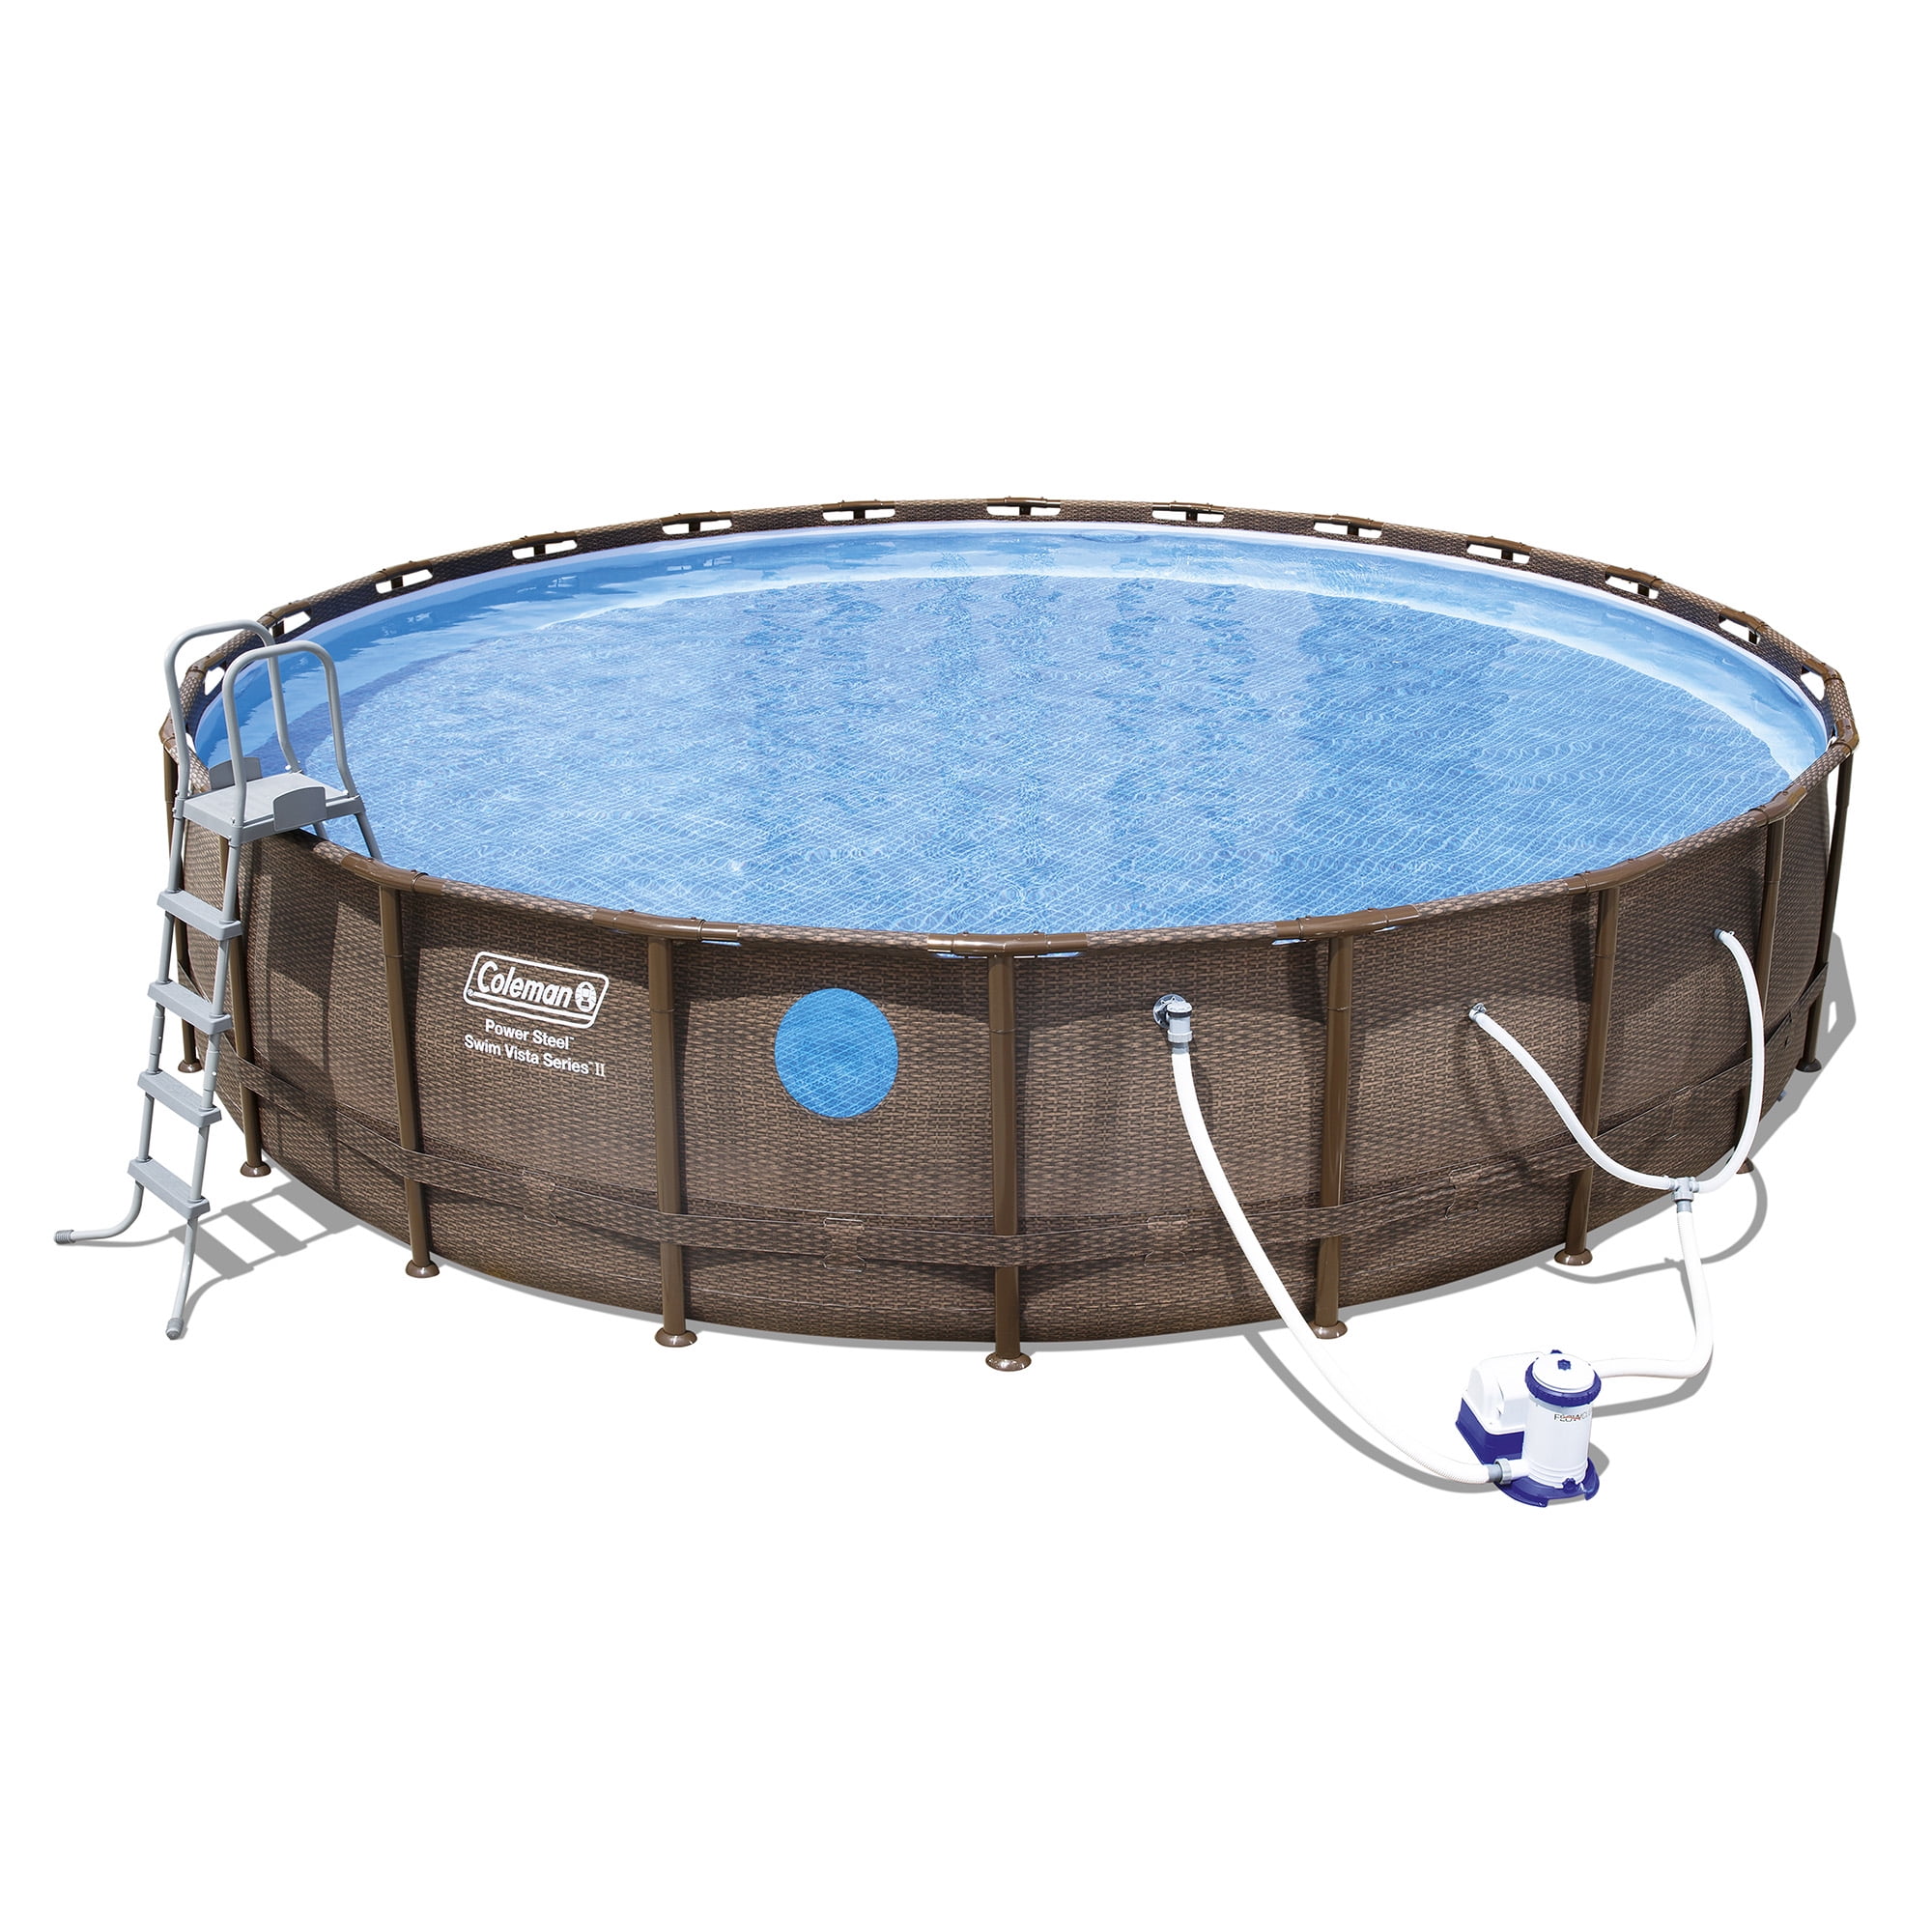 Coleman 22'x52" Swim Vista II Pool Set with Pump, Ladder and Cover